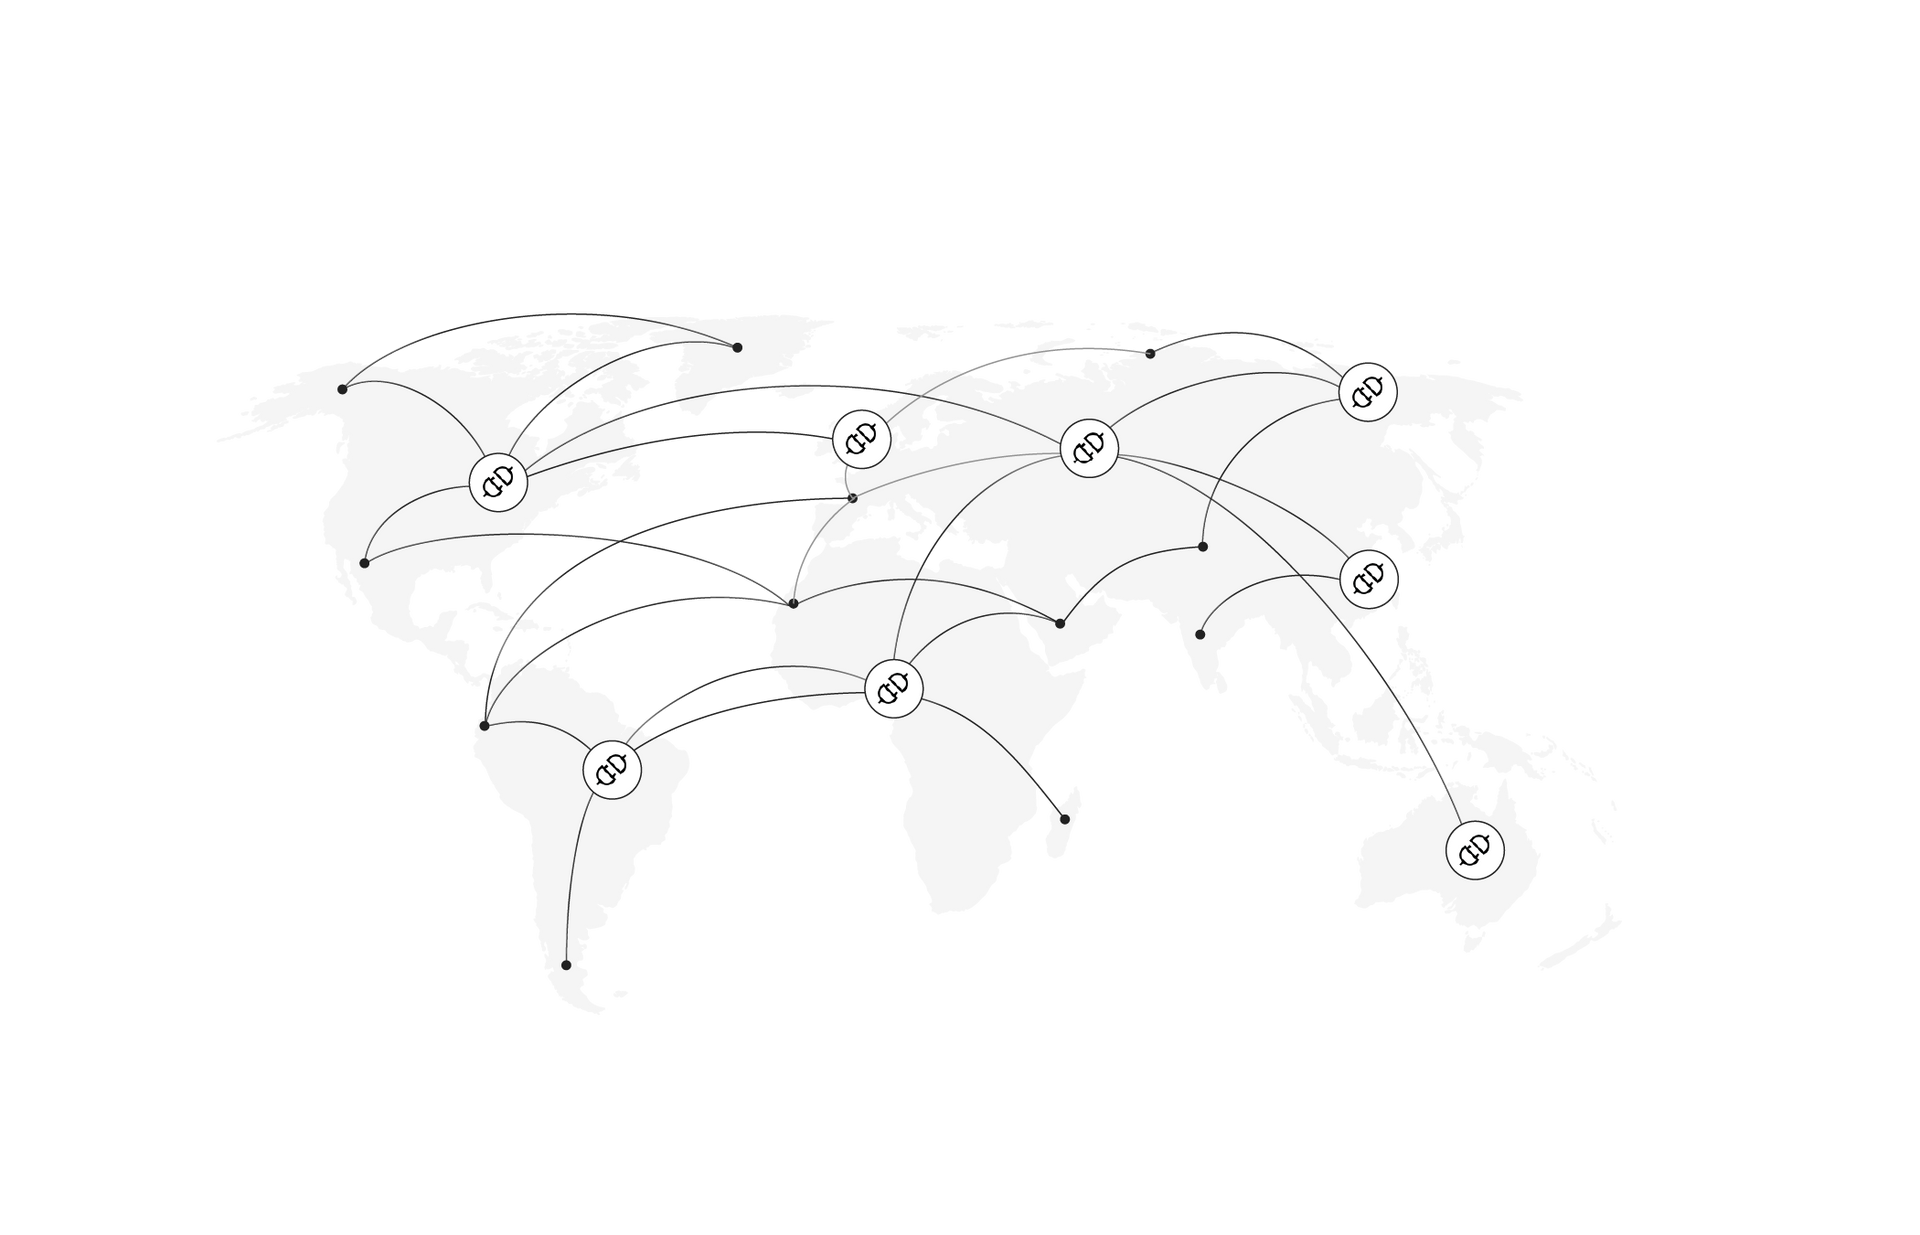 World map with lines connecting countries